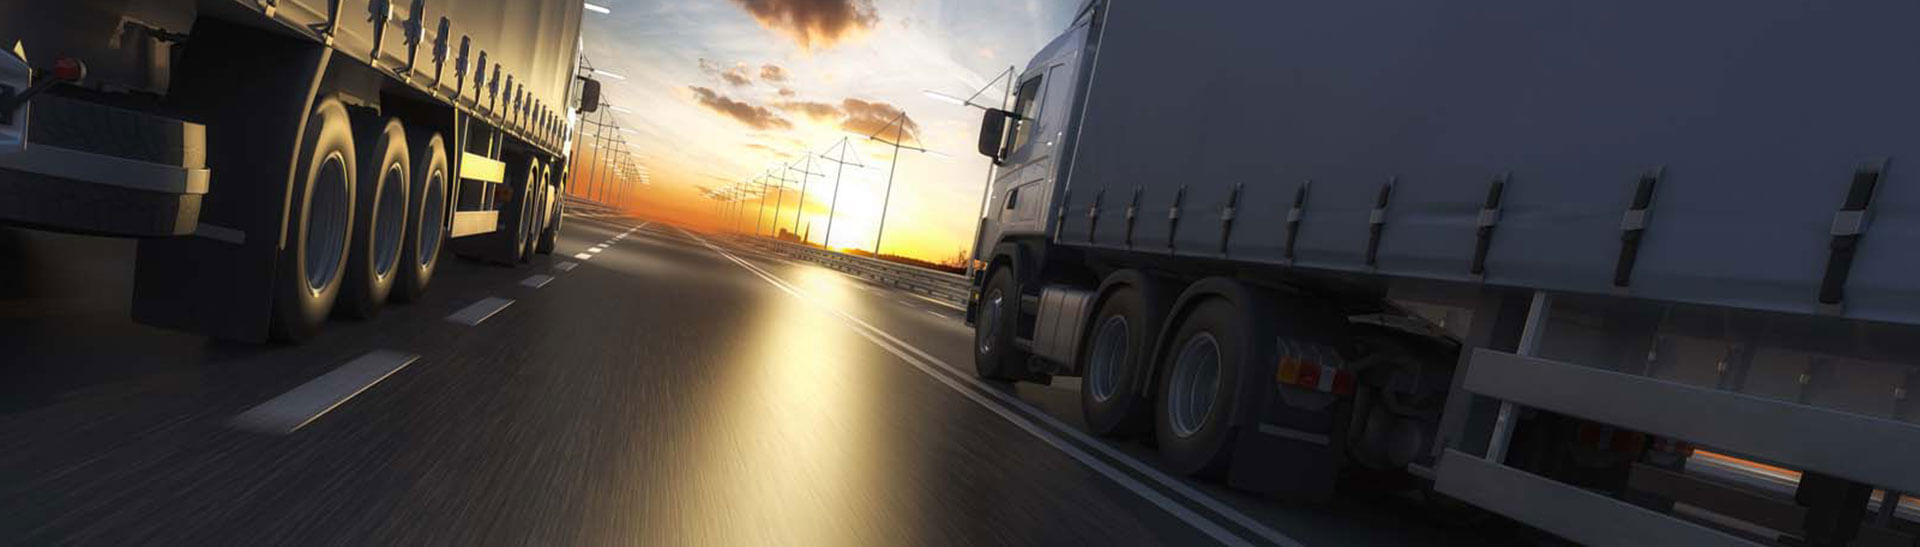 Dayton Trucking Company, Trucking Services and Freight Forwarding Services